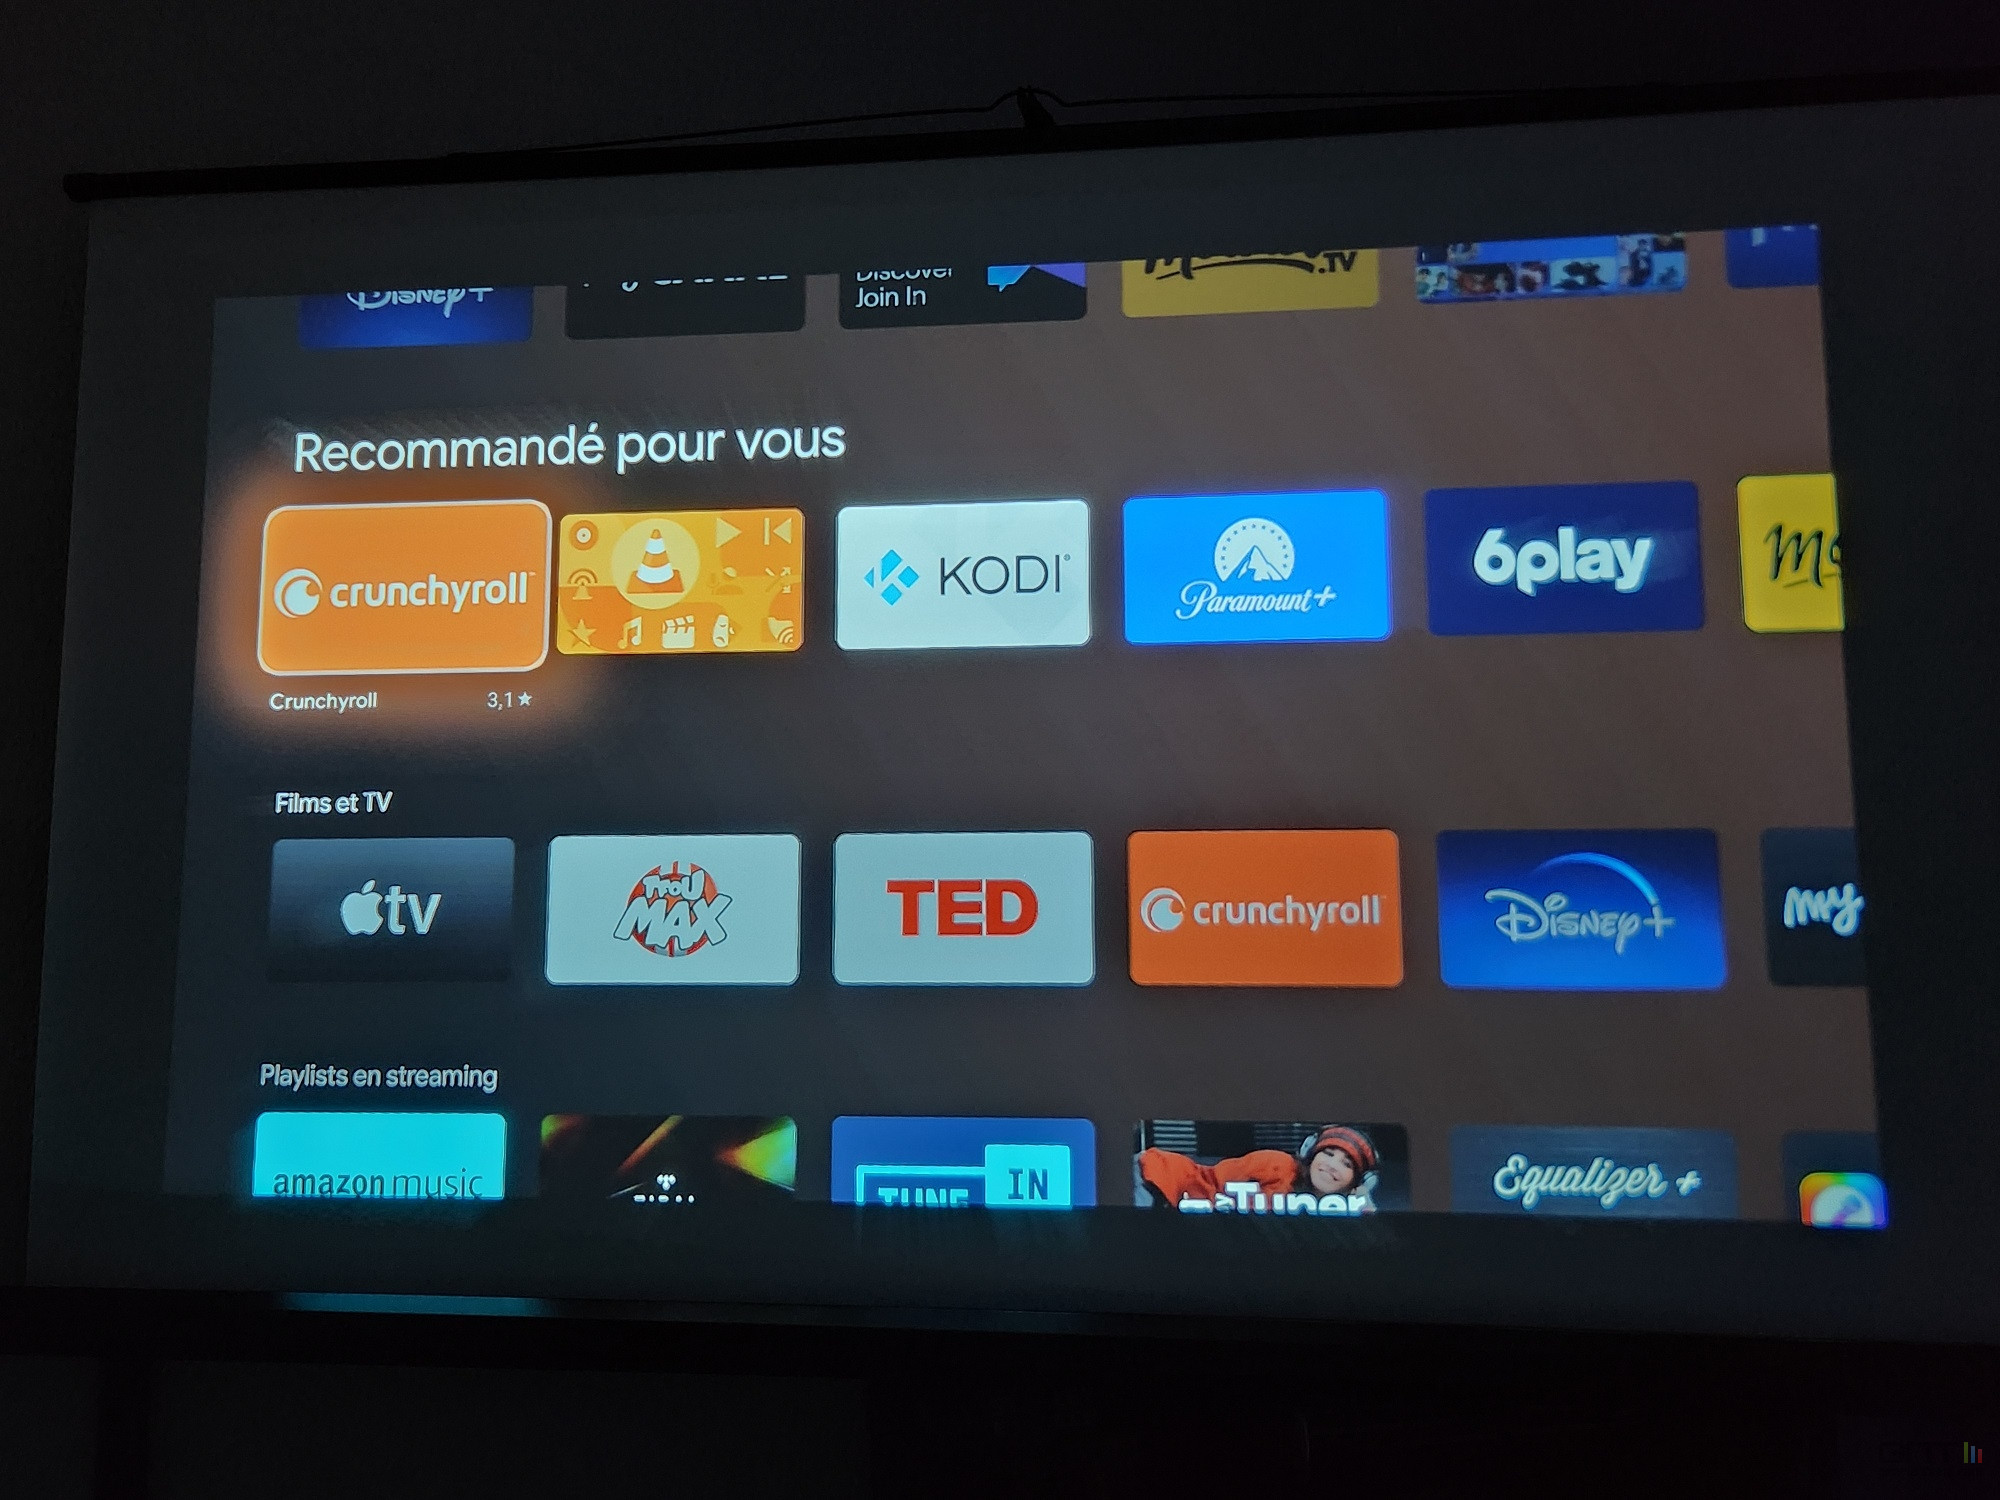 Yaber K2S Android TV applications